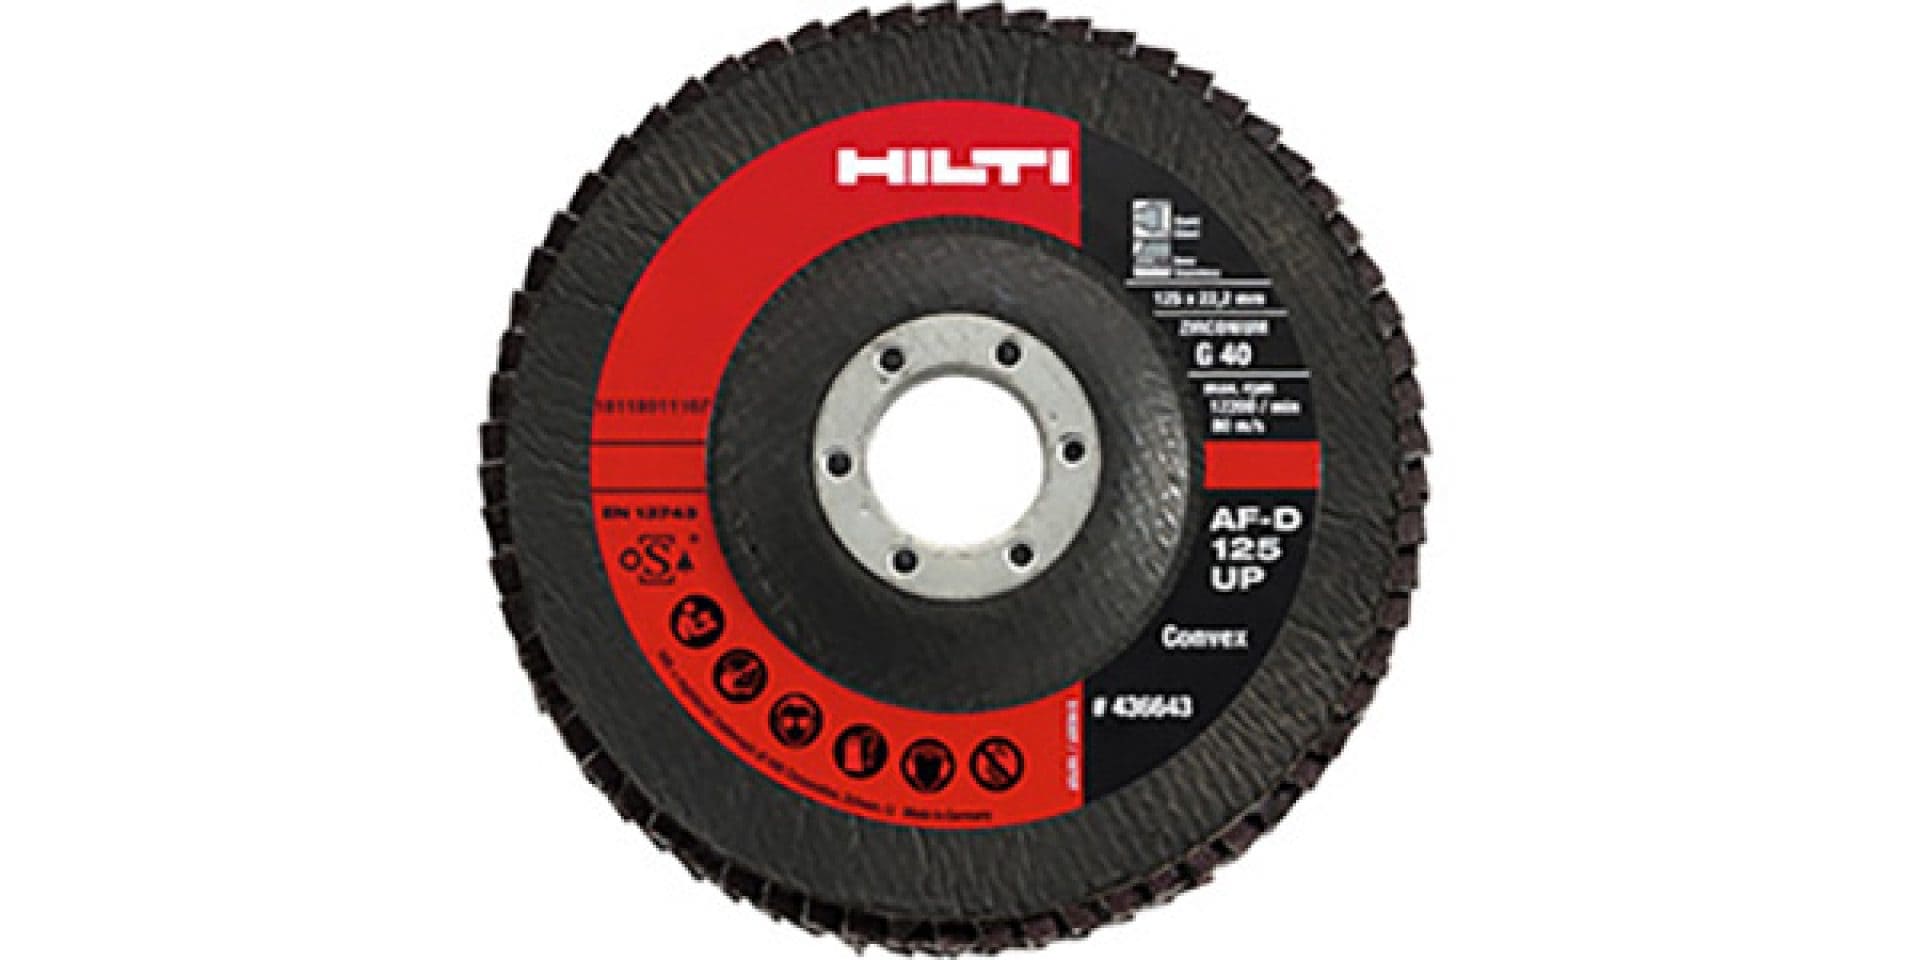 Ultimate flap disc with cooling coating for light grinding on stainless steel.